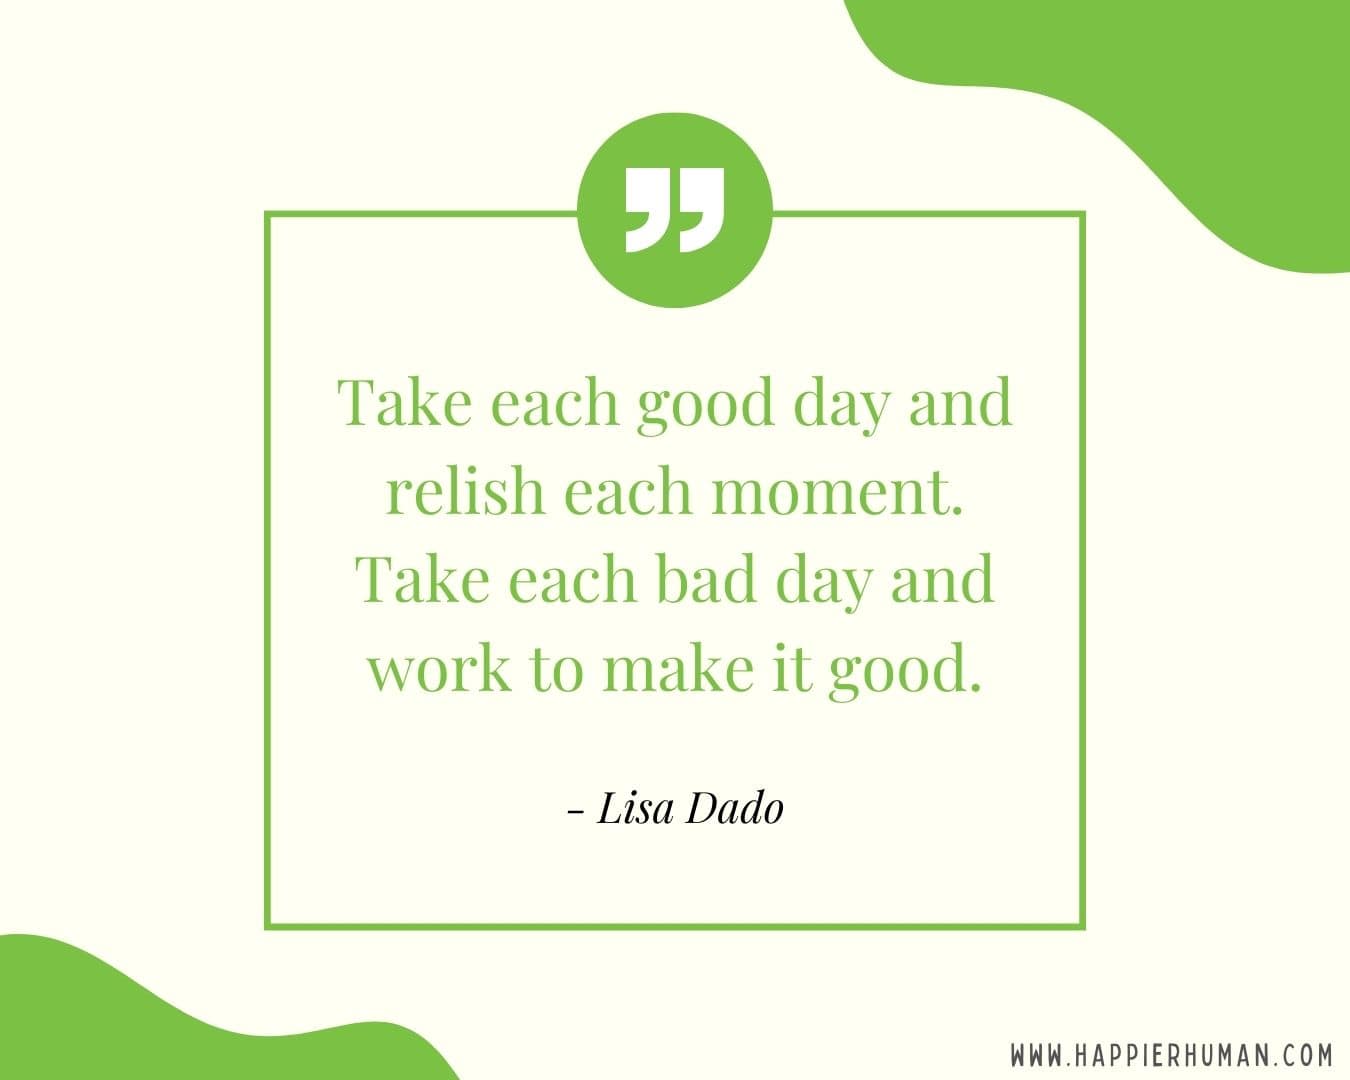 Great Day Quotes - “Take each good day and relish each moment. Take each bad day and work to make it good.” – Lisa Dado